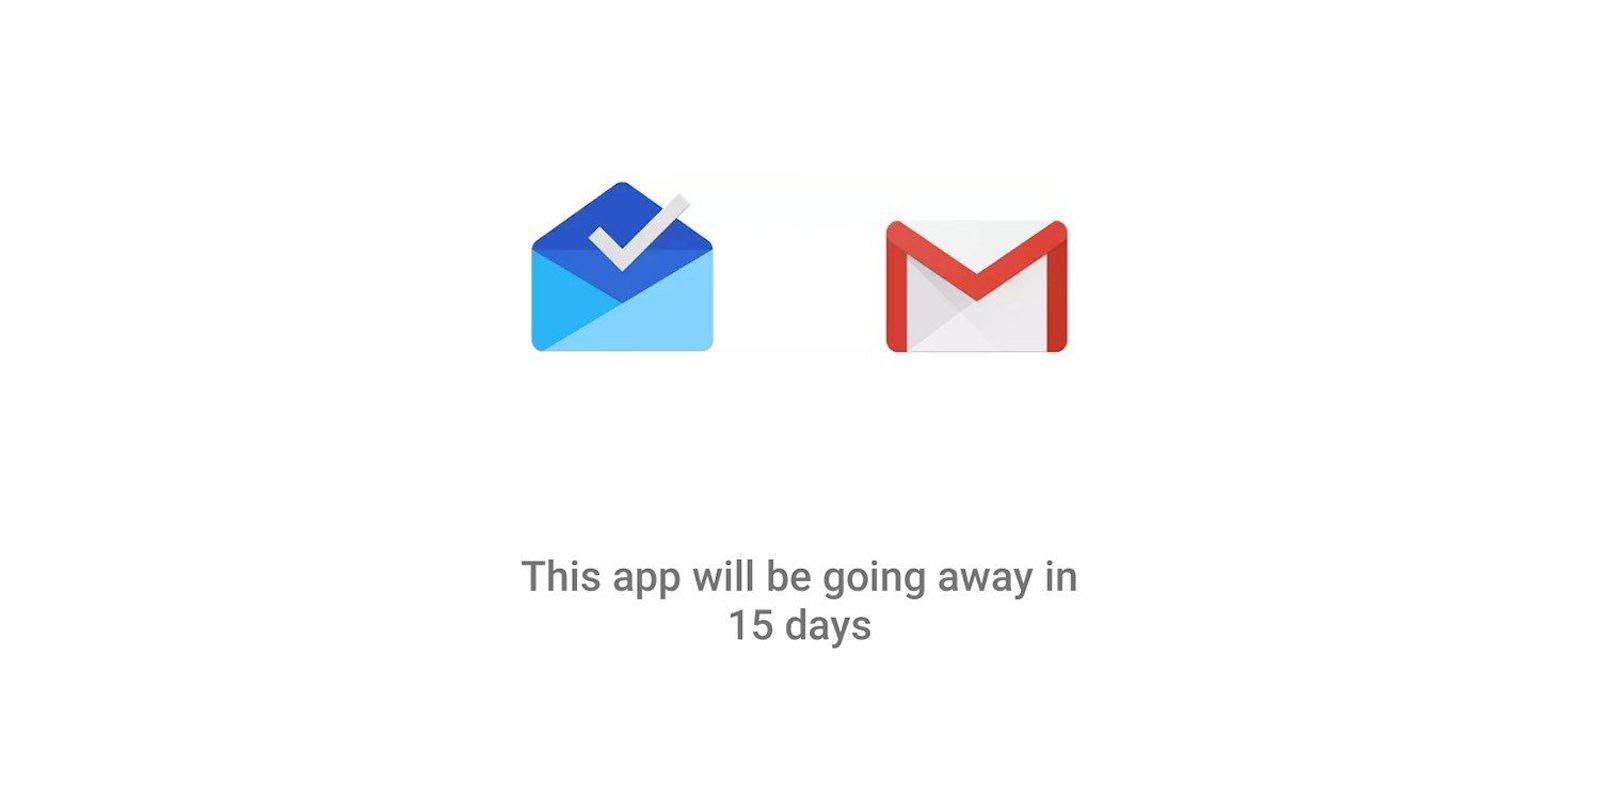 Inbox-by-gmail-is-going-away.jpg